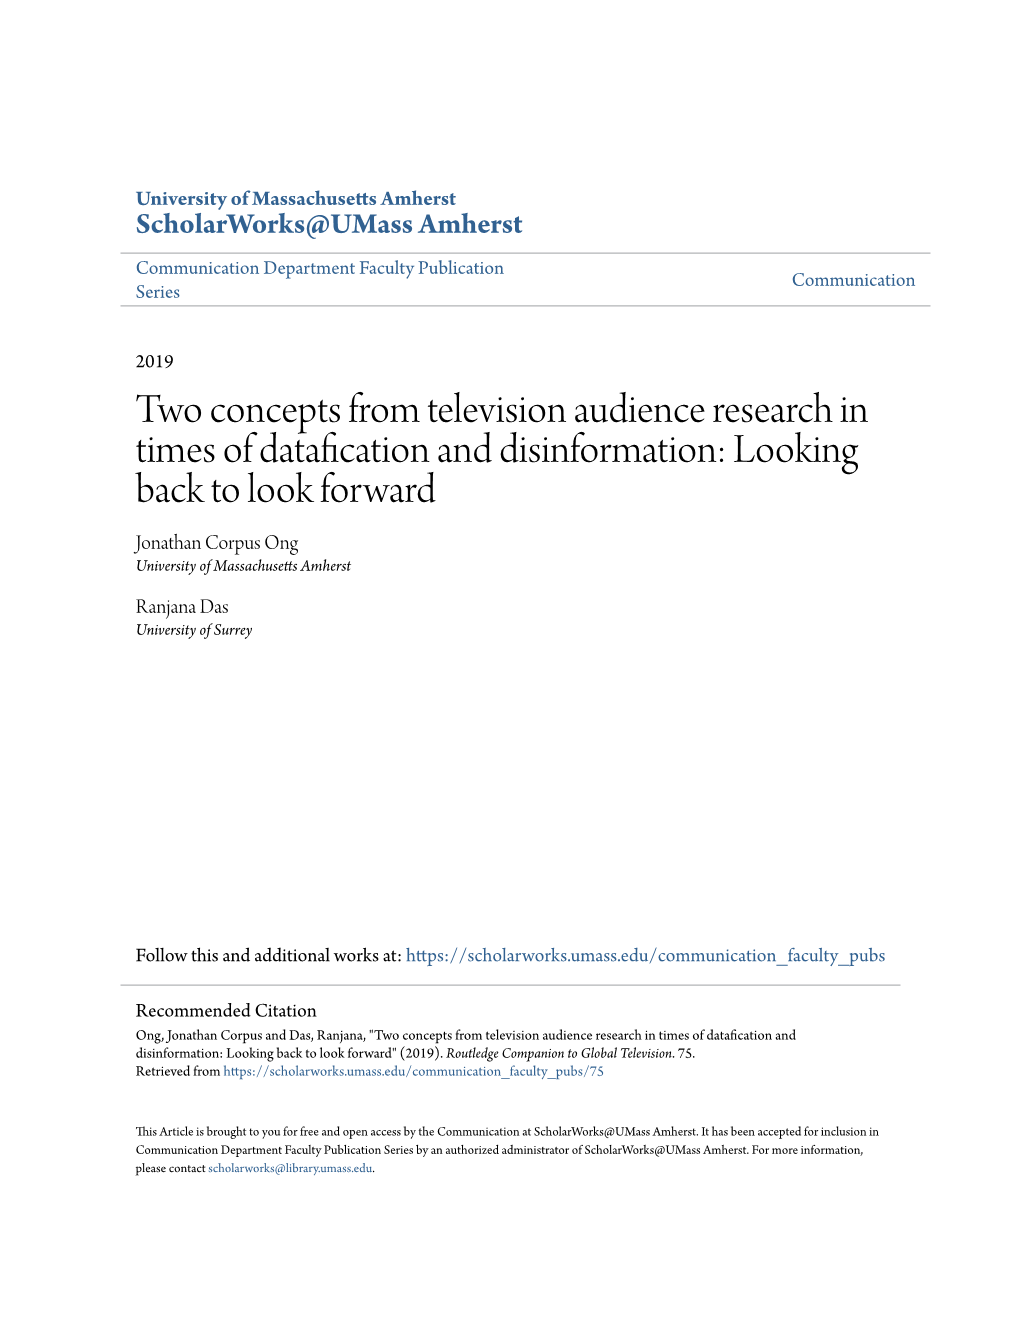 Two Concepts from Television Audience Research in Times Of